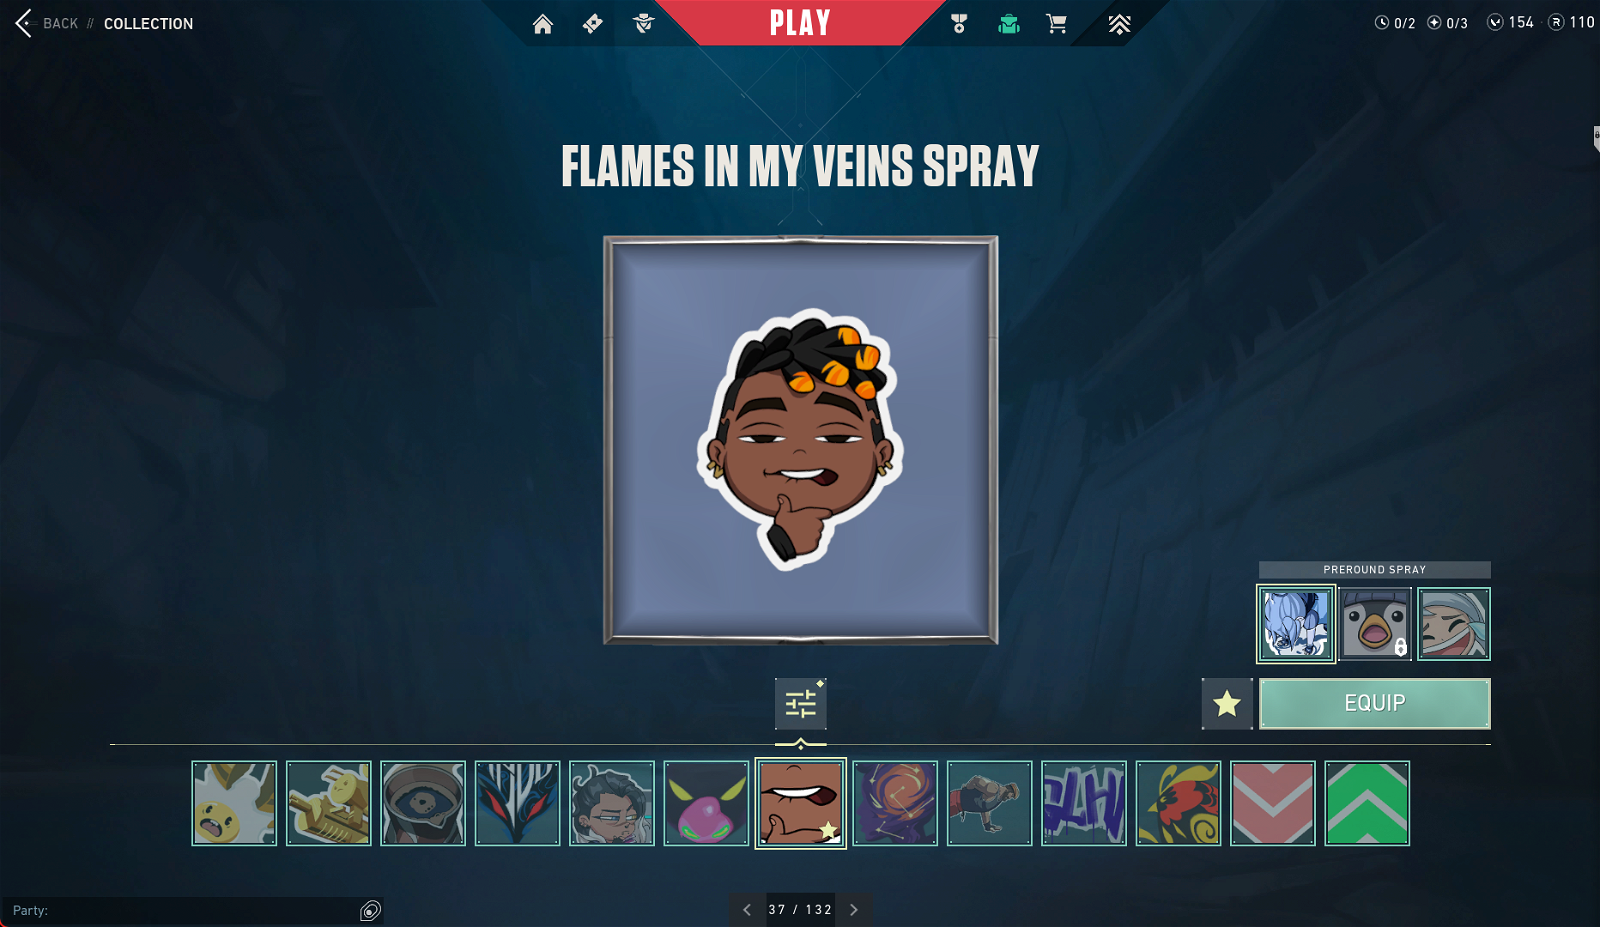 How To Get Flames in My Veins Spray in Valorant